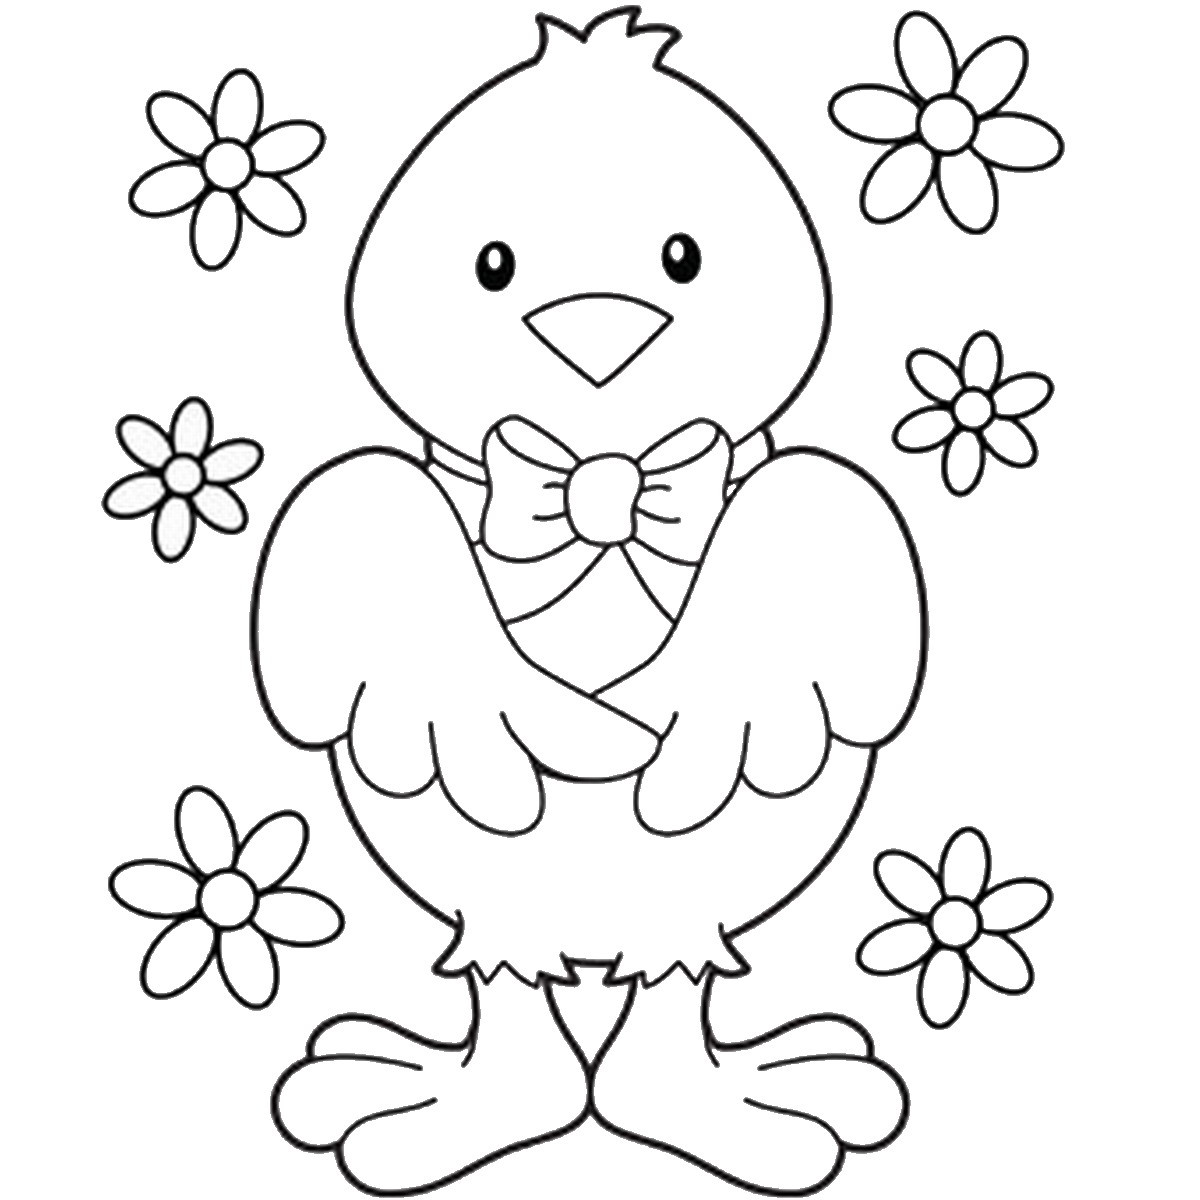 Easter Coloring Sheets For Kids
 Easter Coloring Pages